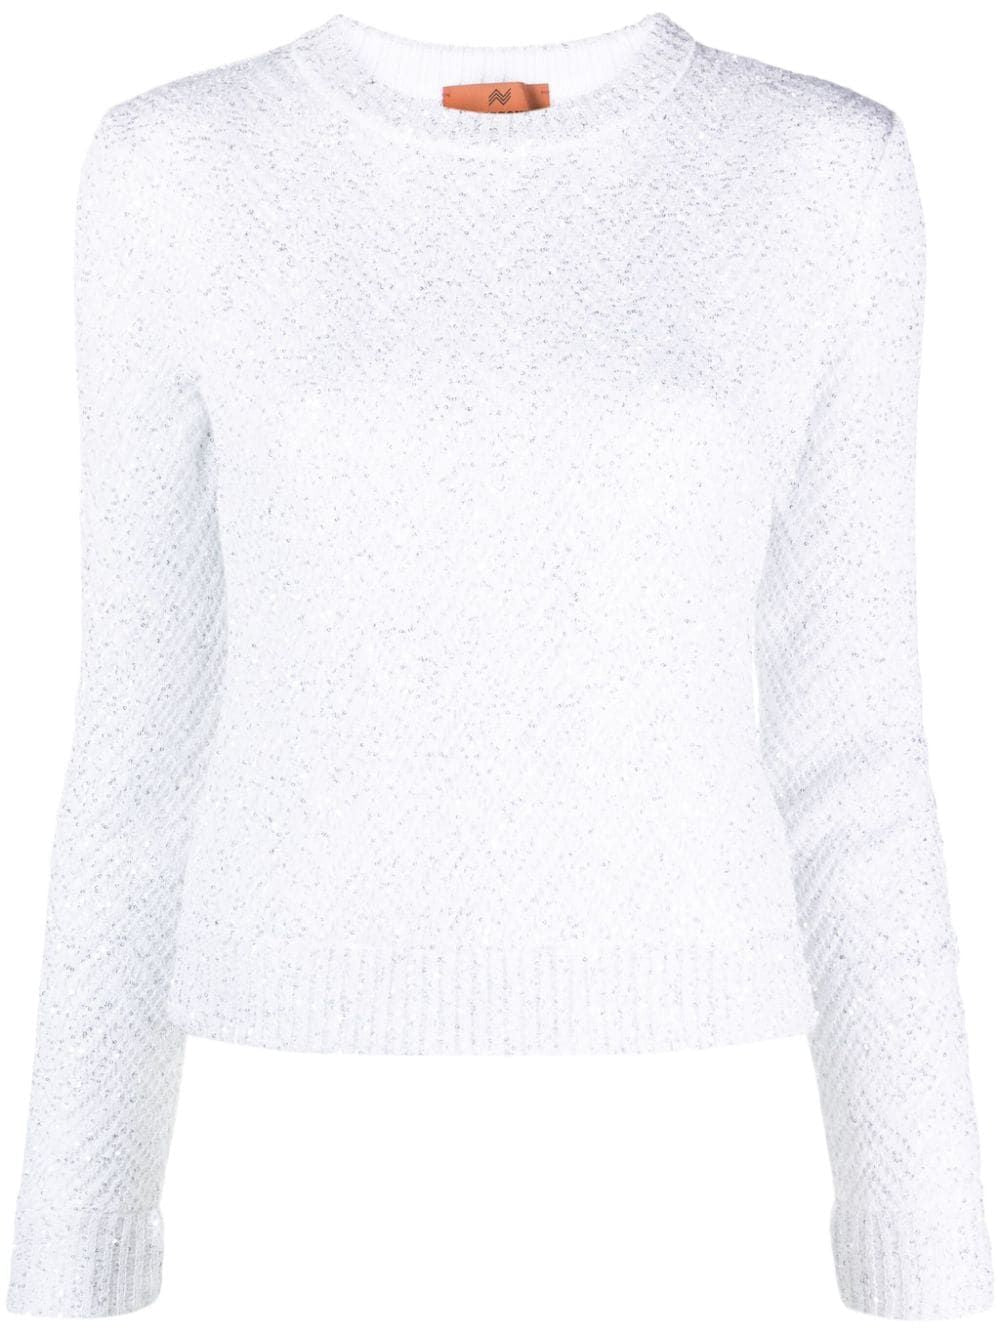 MISSONI White Chevron-Knit Sequin Jumper for Women from FW23 Collection